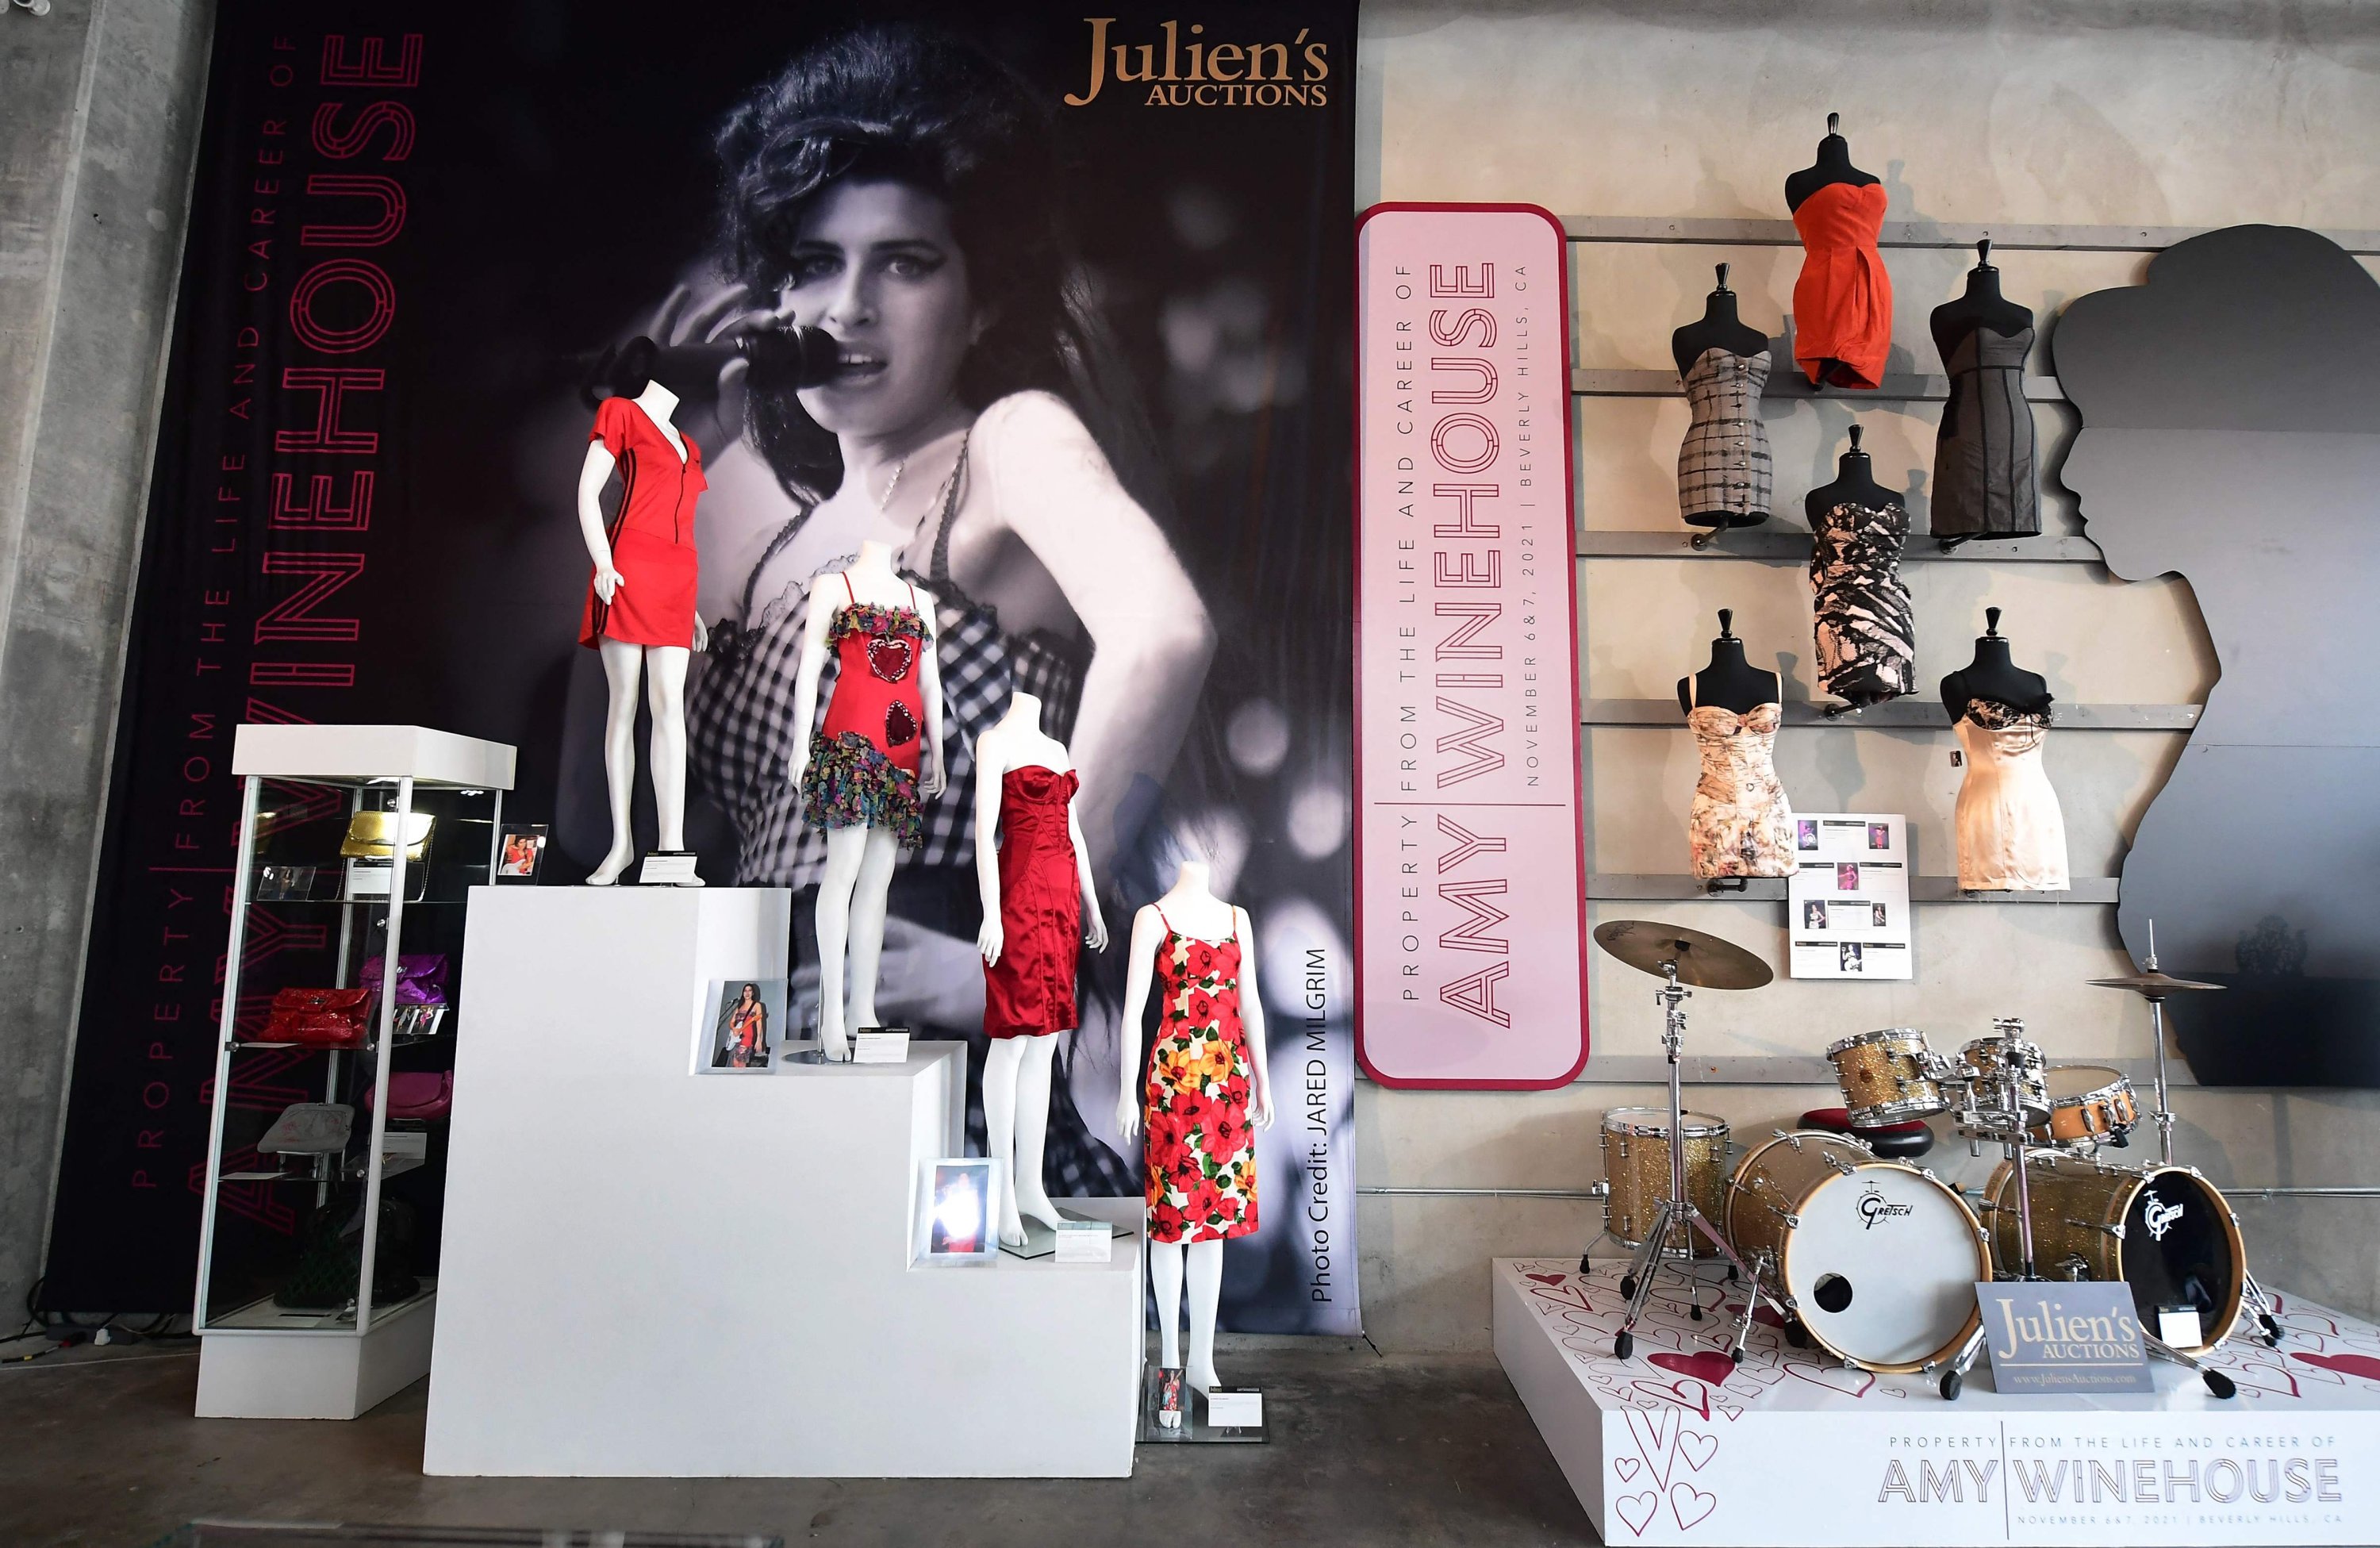 A collection of Amy Winehouse's dresses and her drum set are displayed at Julien's Auctions in Beverly Hills, California, U.S., Nov. 1, 2021, ahead of the 'Property from the Life and Career of Amy Winehouse' auction held Nov. 6-7, 2021. (AFP Photo)